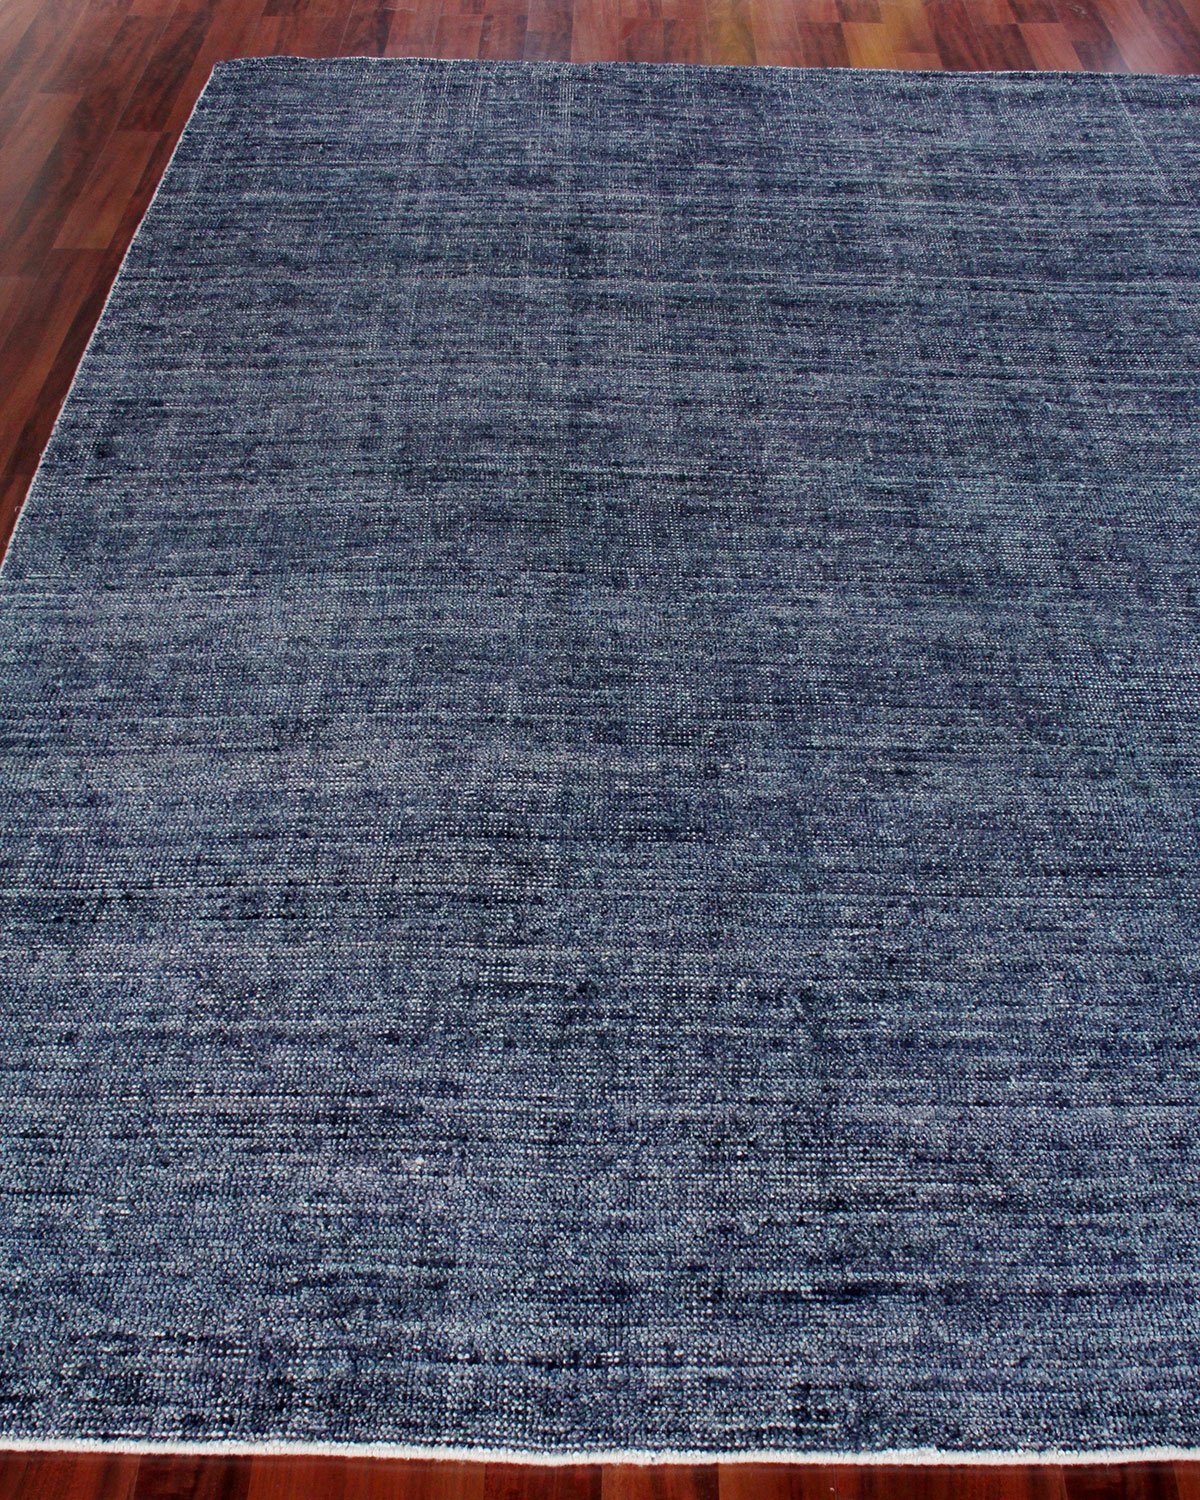 Jaspin Hand-Woven Area Rug, 6' x 9'